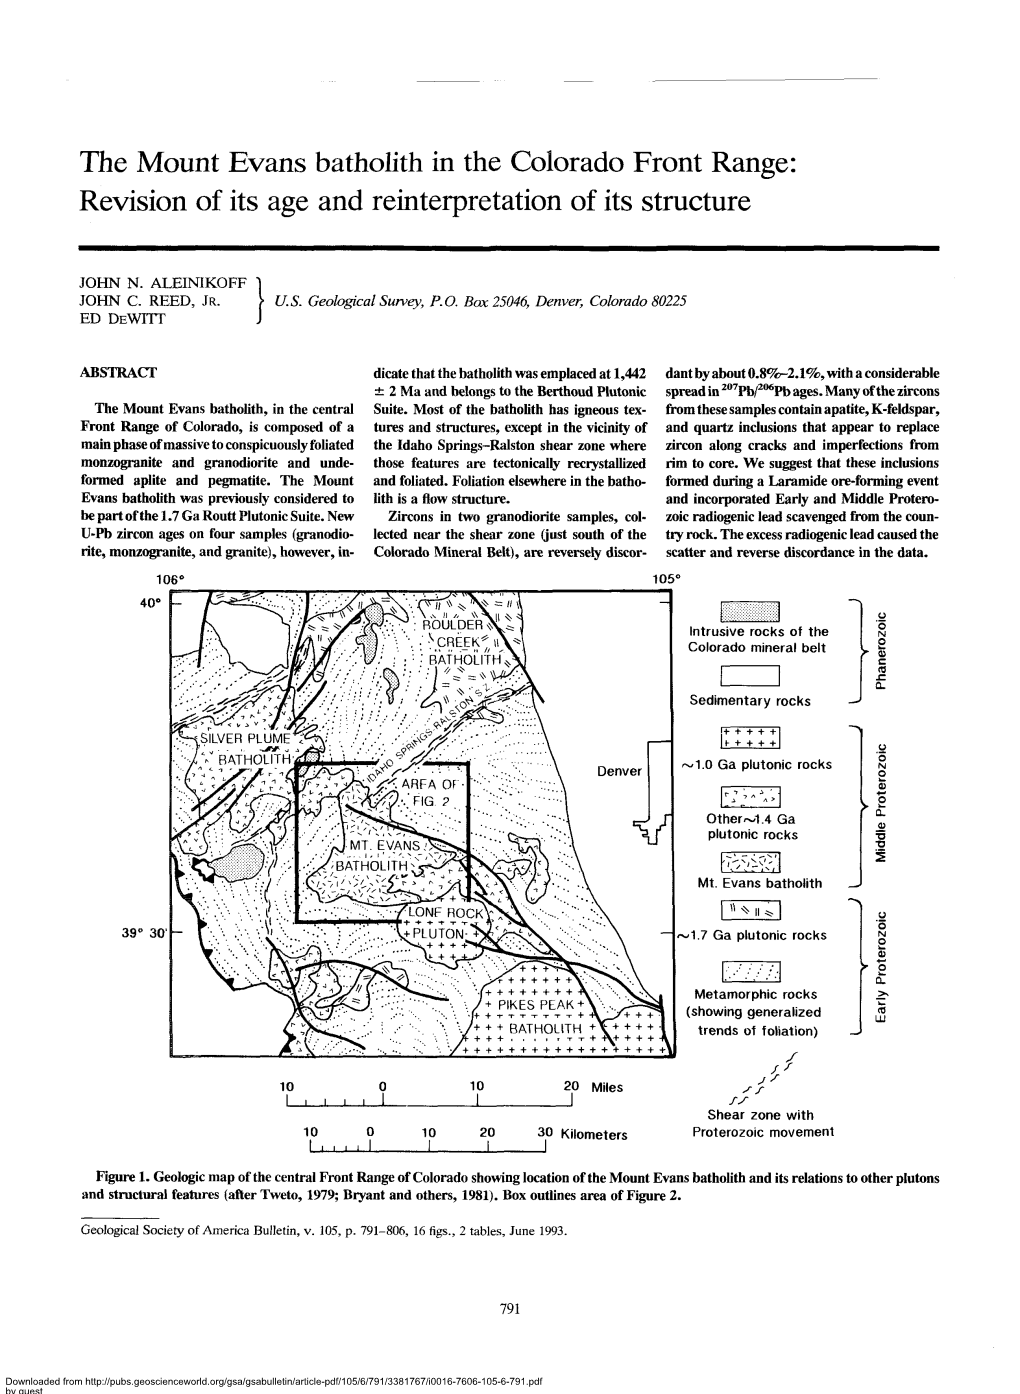 The Mount Evans Batholith in the Colorado Front Range: Revision of Its Age and Reinterpretation of Its Structure